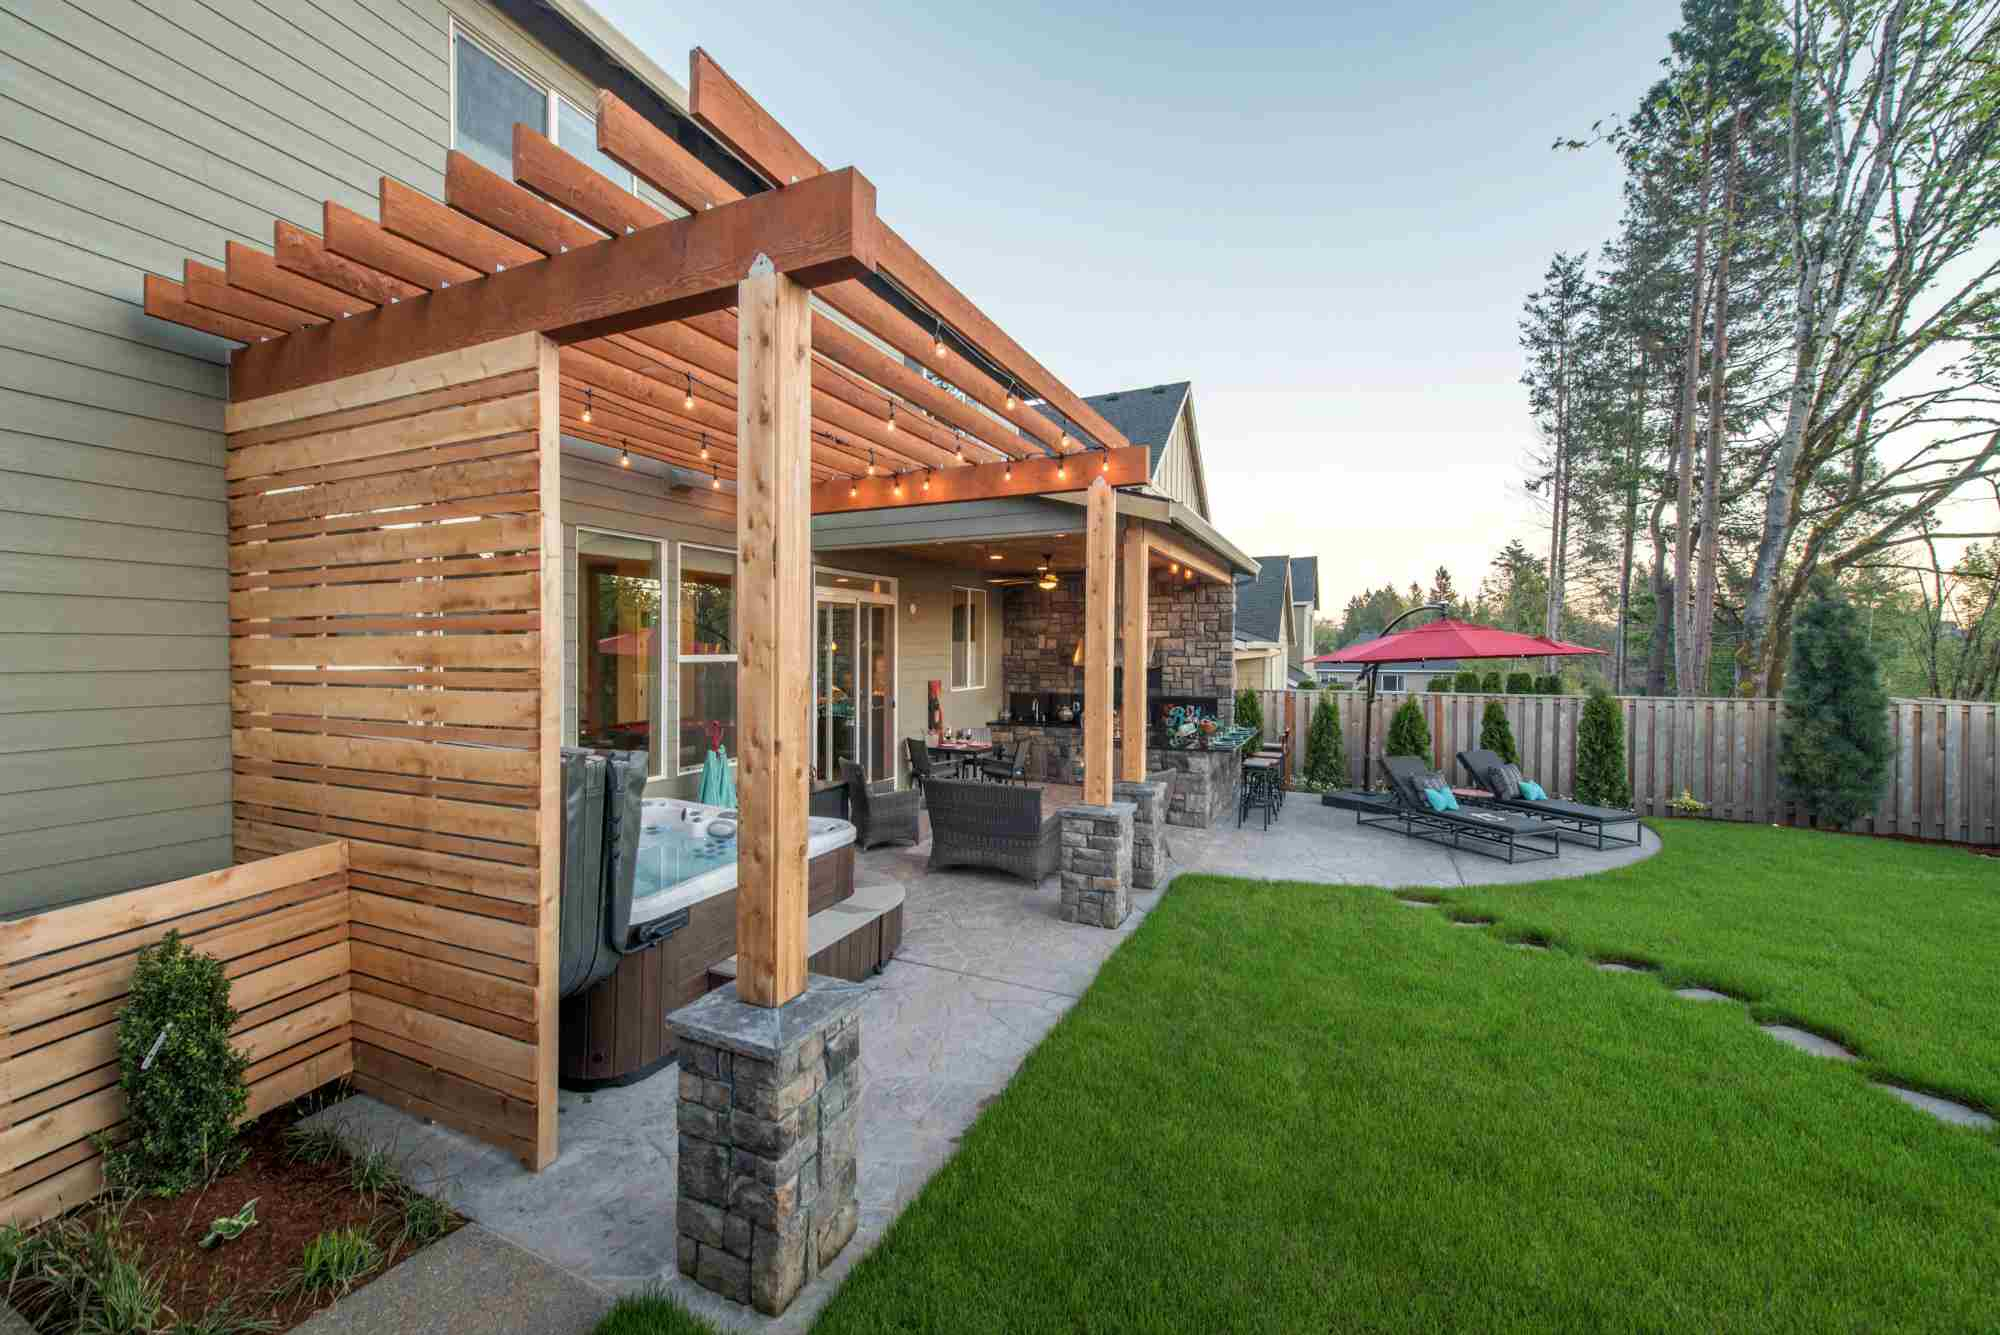 Landscape Makeover An Oregon Yard With Activity Zones intended for dimensions 2000 X 1335